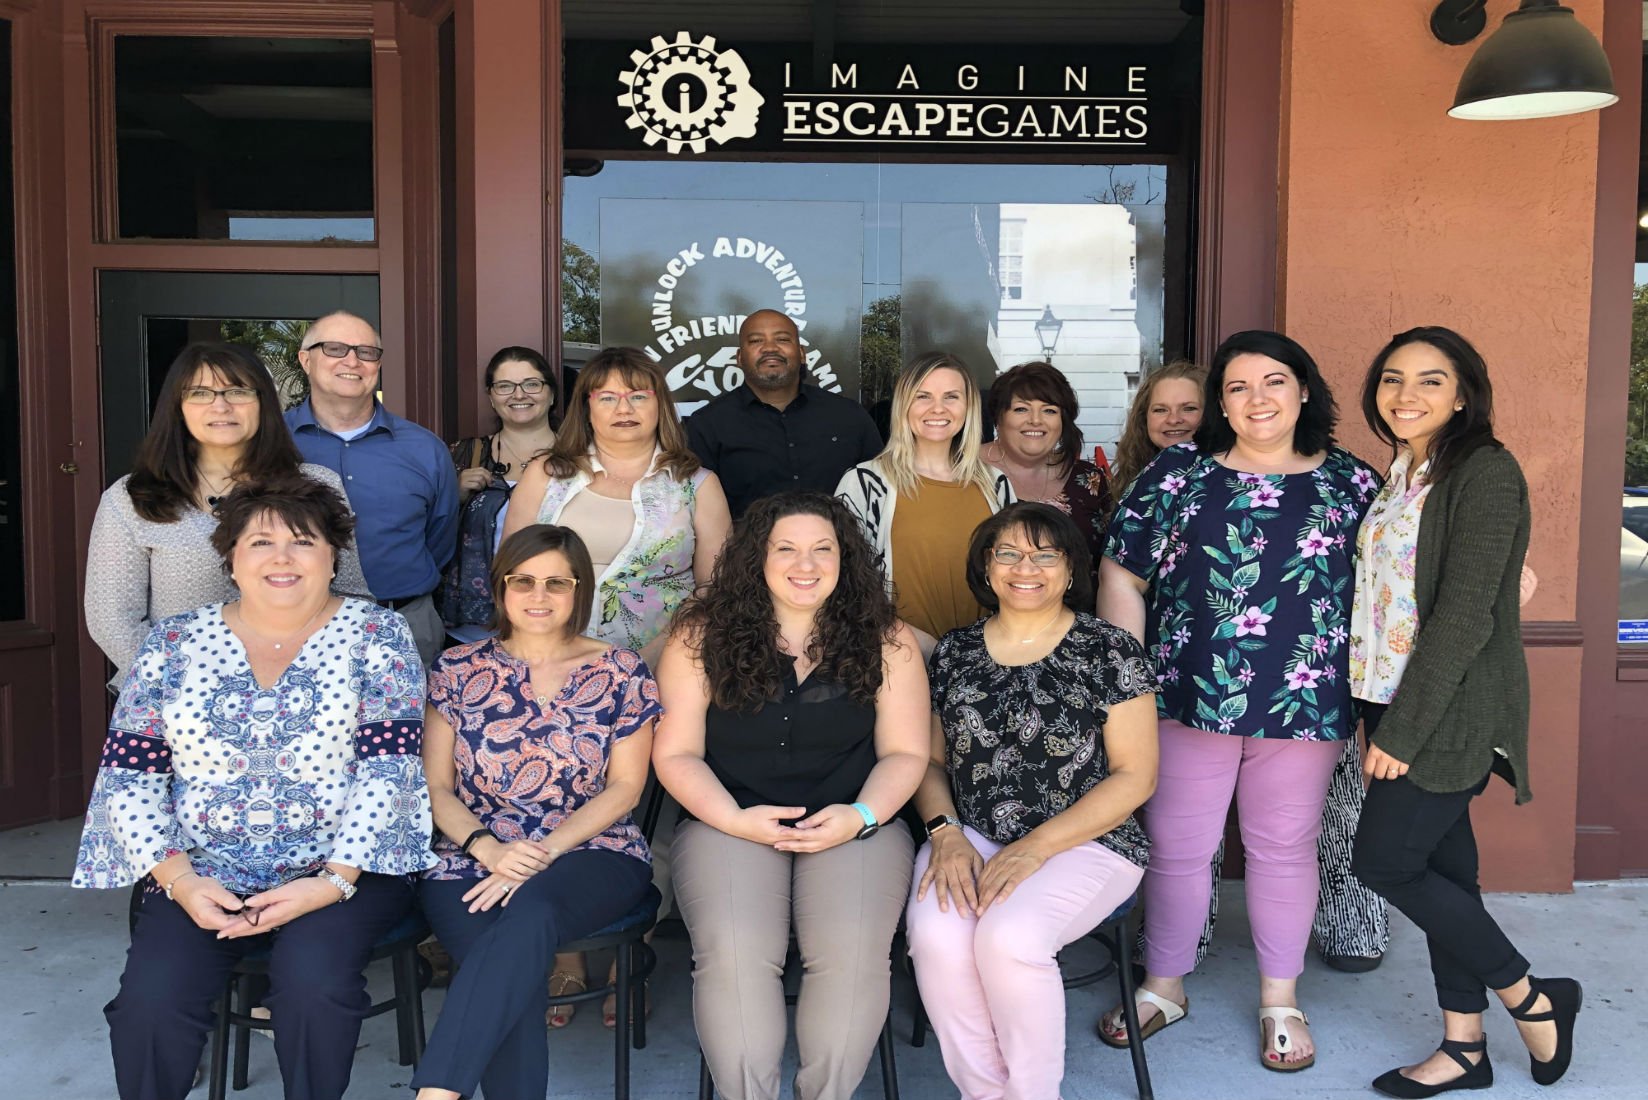 BBDG professionals celebrated Administrative Professionals Day 2019